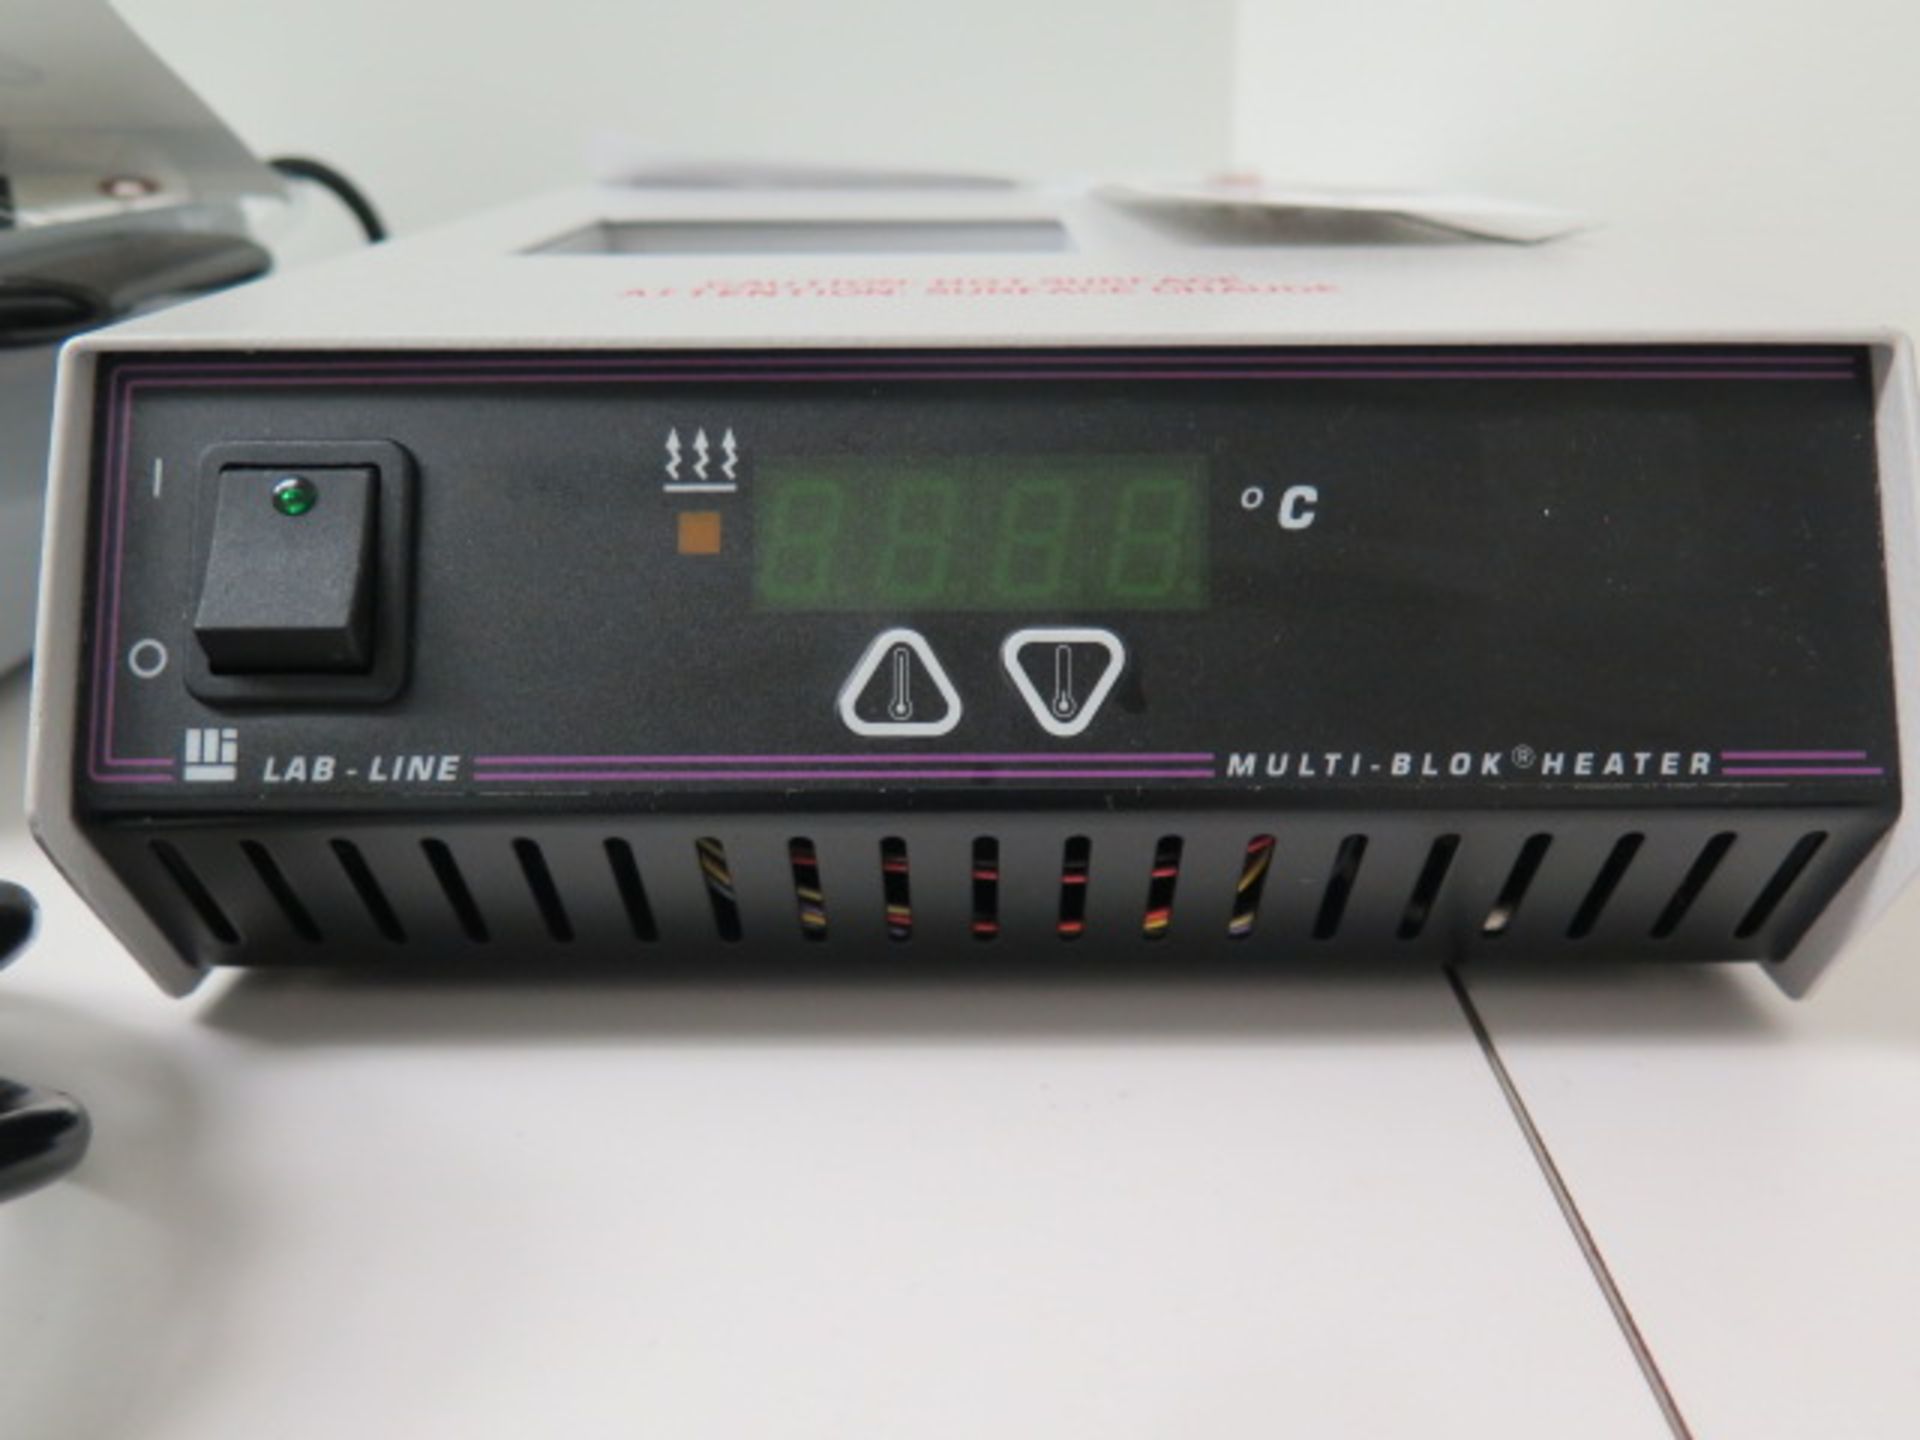 Lab-Line Multi-Blok Heater (SOLD AS-IS - NO WARRANTY) - Image 4 of 5